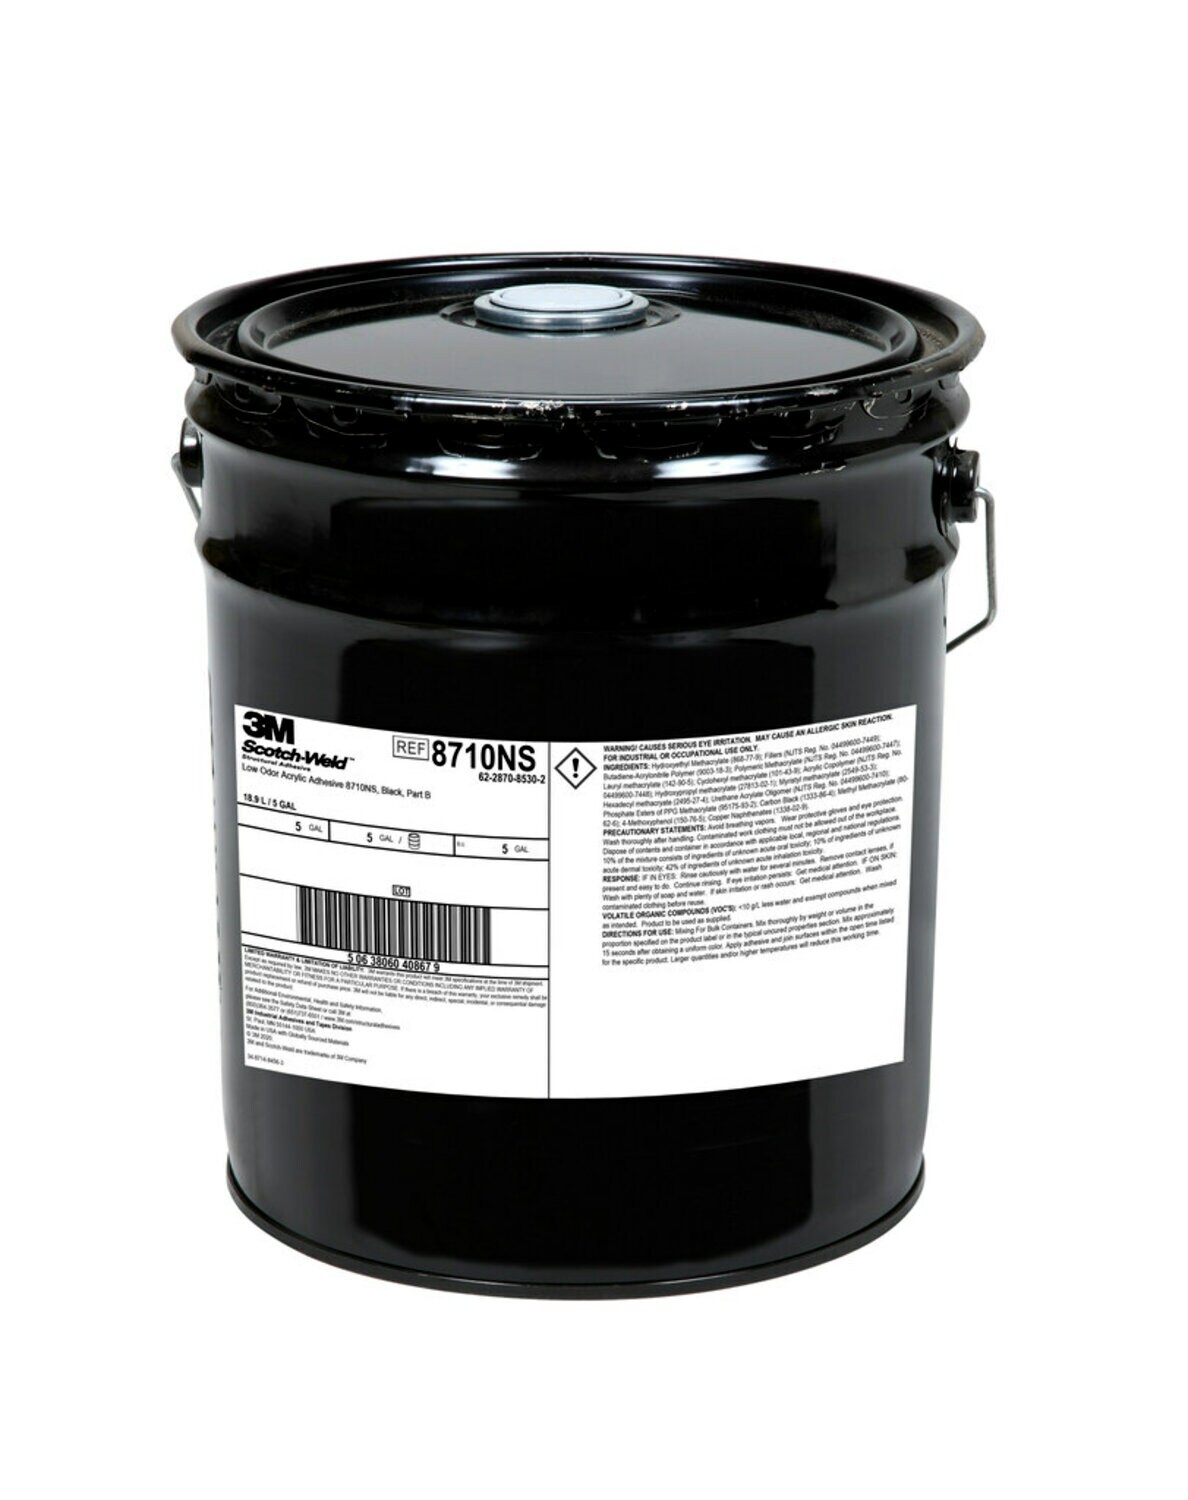 00638060408674, 3M Scotch-Weld Low Odor Acrylic Adhesive 8710NS, Black,  Part B, 5 Gallon (Pail), Drum, Aircraft products, two-part-structural-adhesives